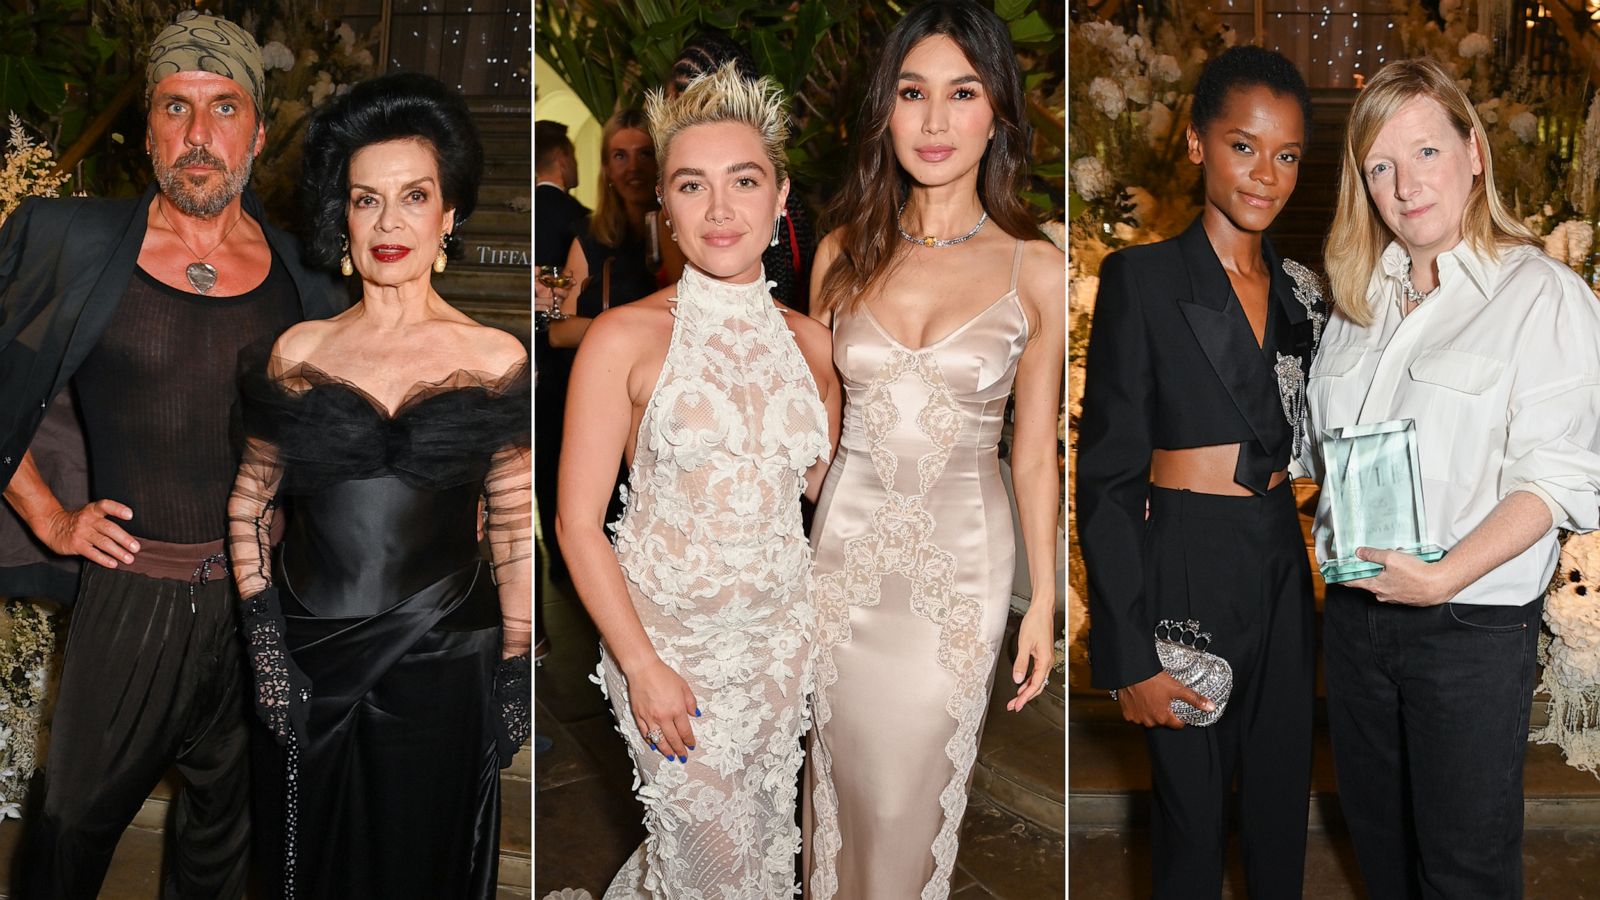 Florence Pugh, Letitia Wright and others show off stunning looks at ELLE Style Awards